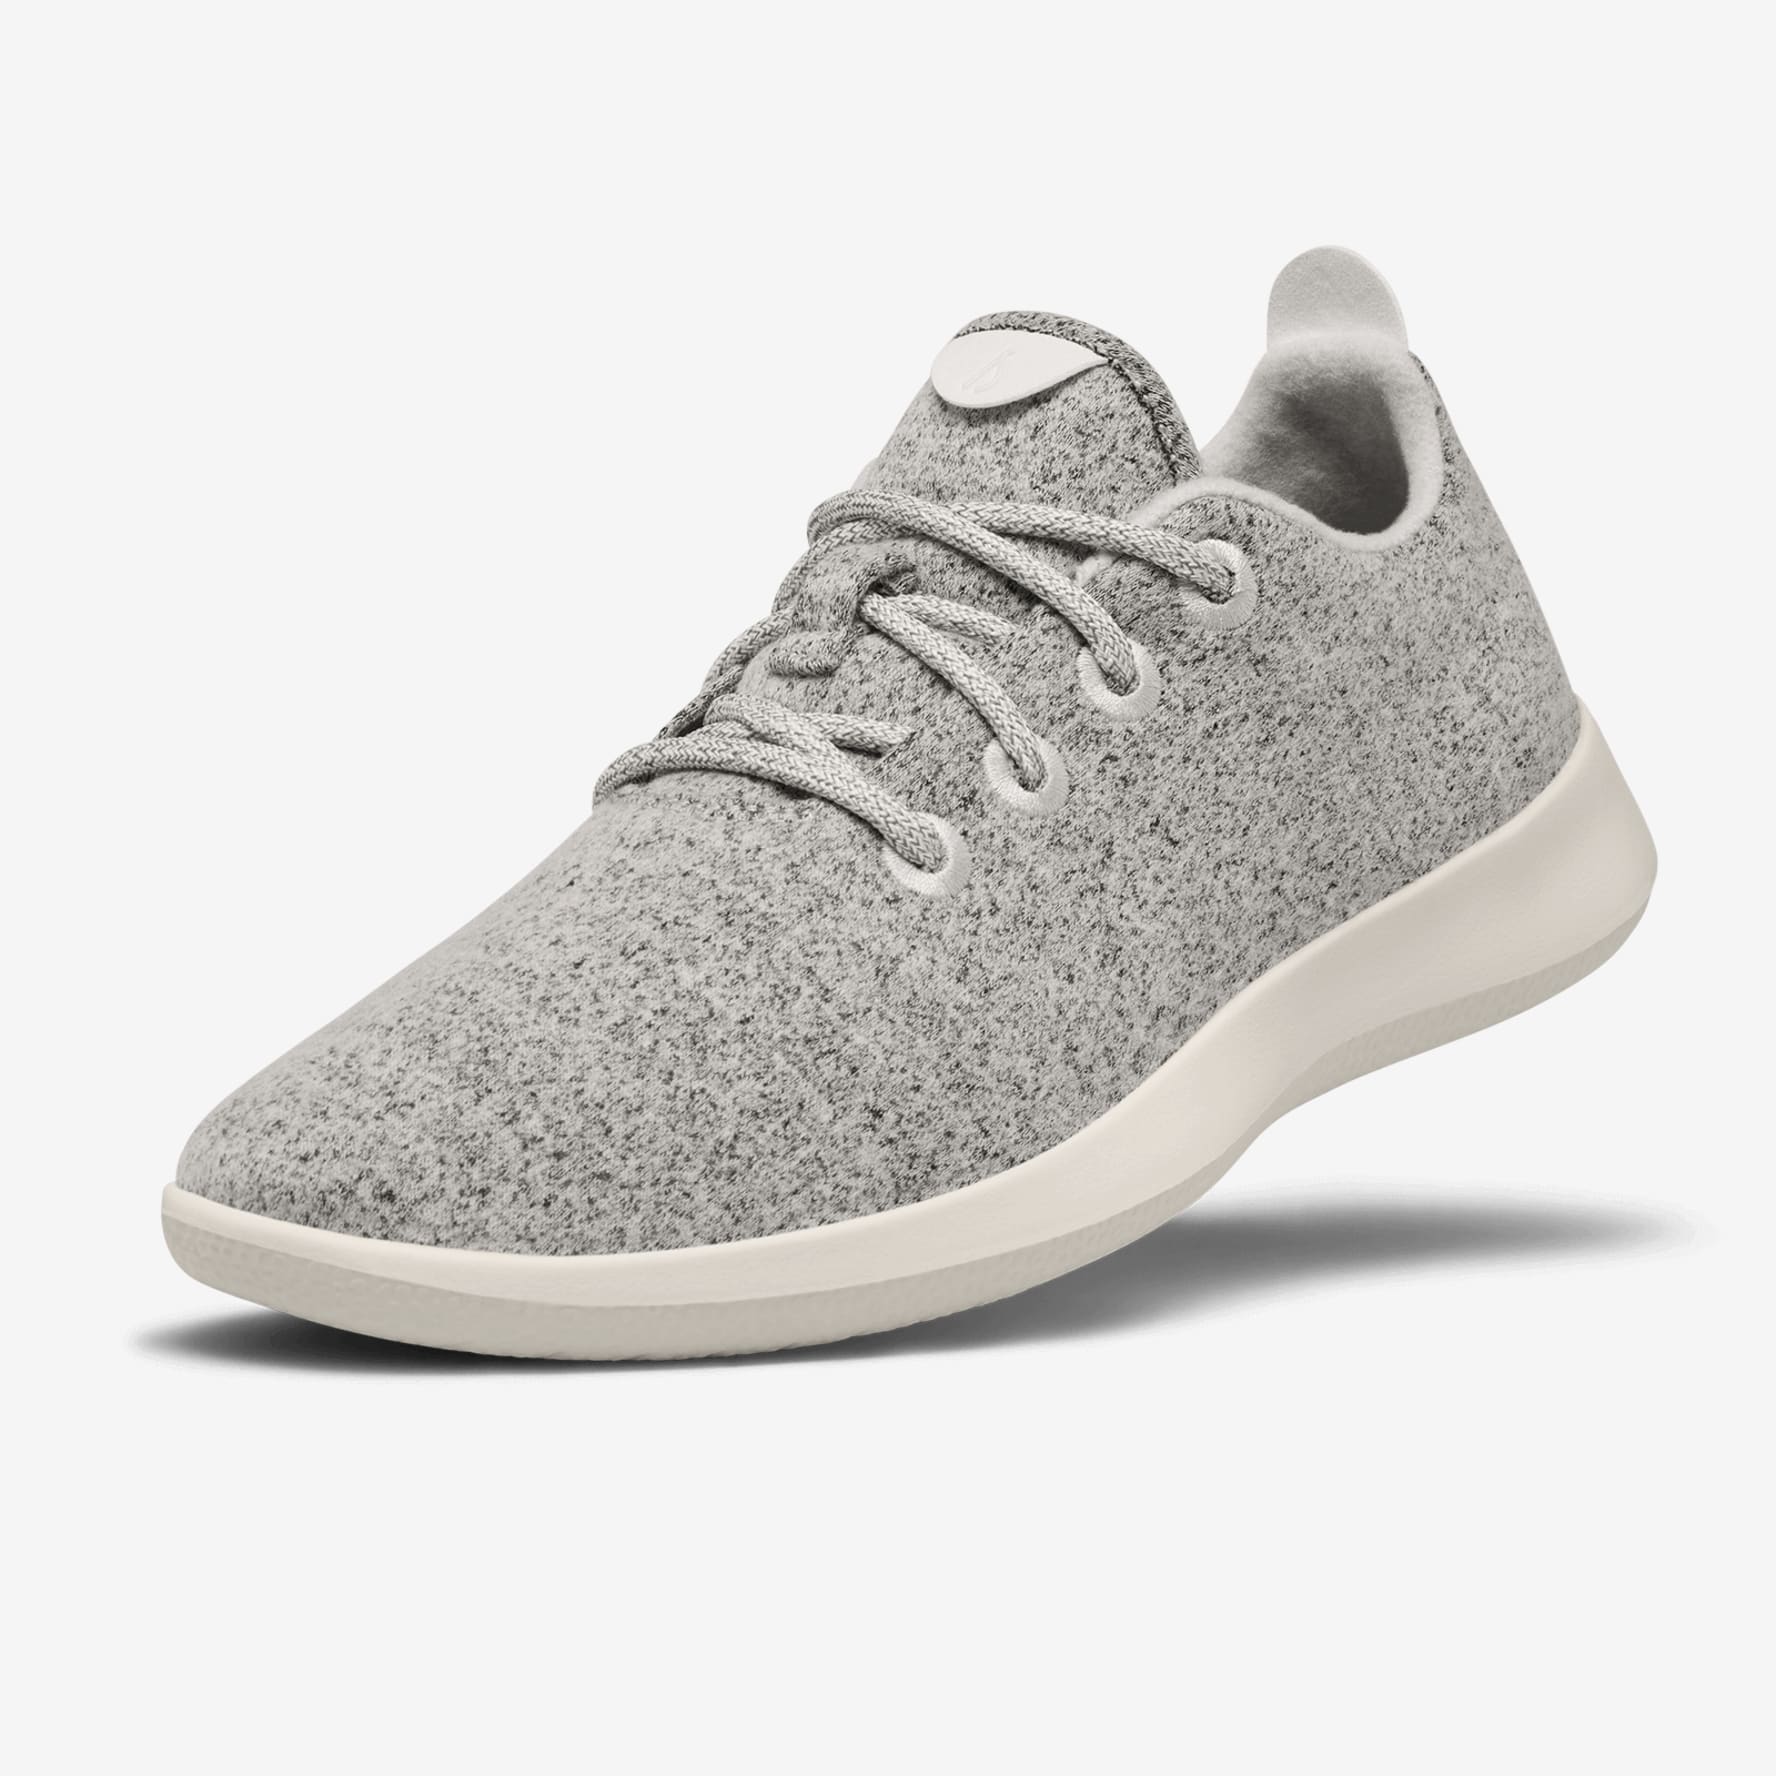 Allbirds Wool Runner-Up Mizzles Review: The Ultimate Sustainable